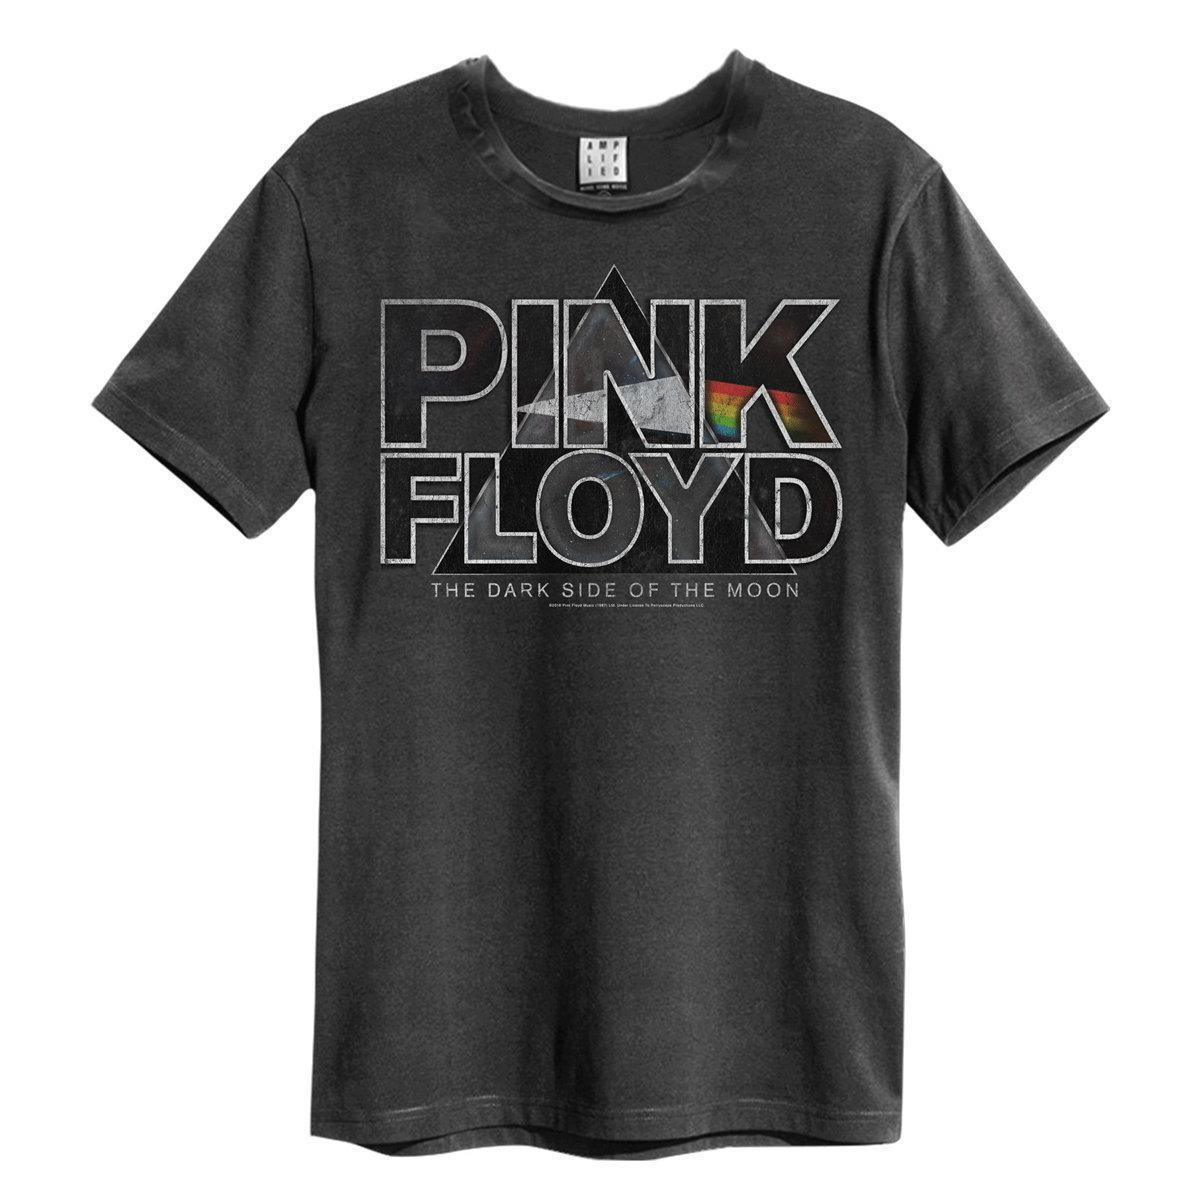 Amplified Unisex Adult Space Pyramid Pink Floyd T-Shirt (Charcoal) (XXL)